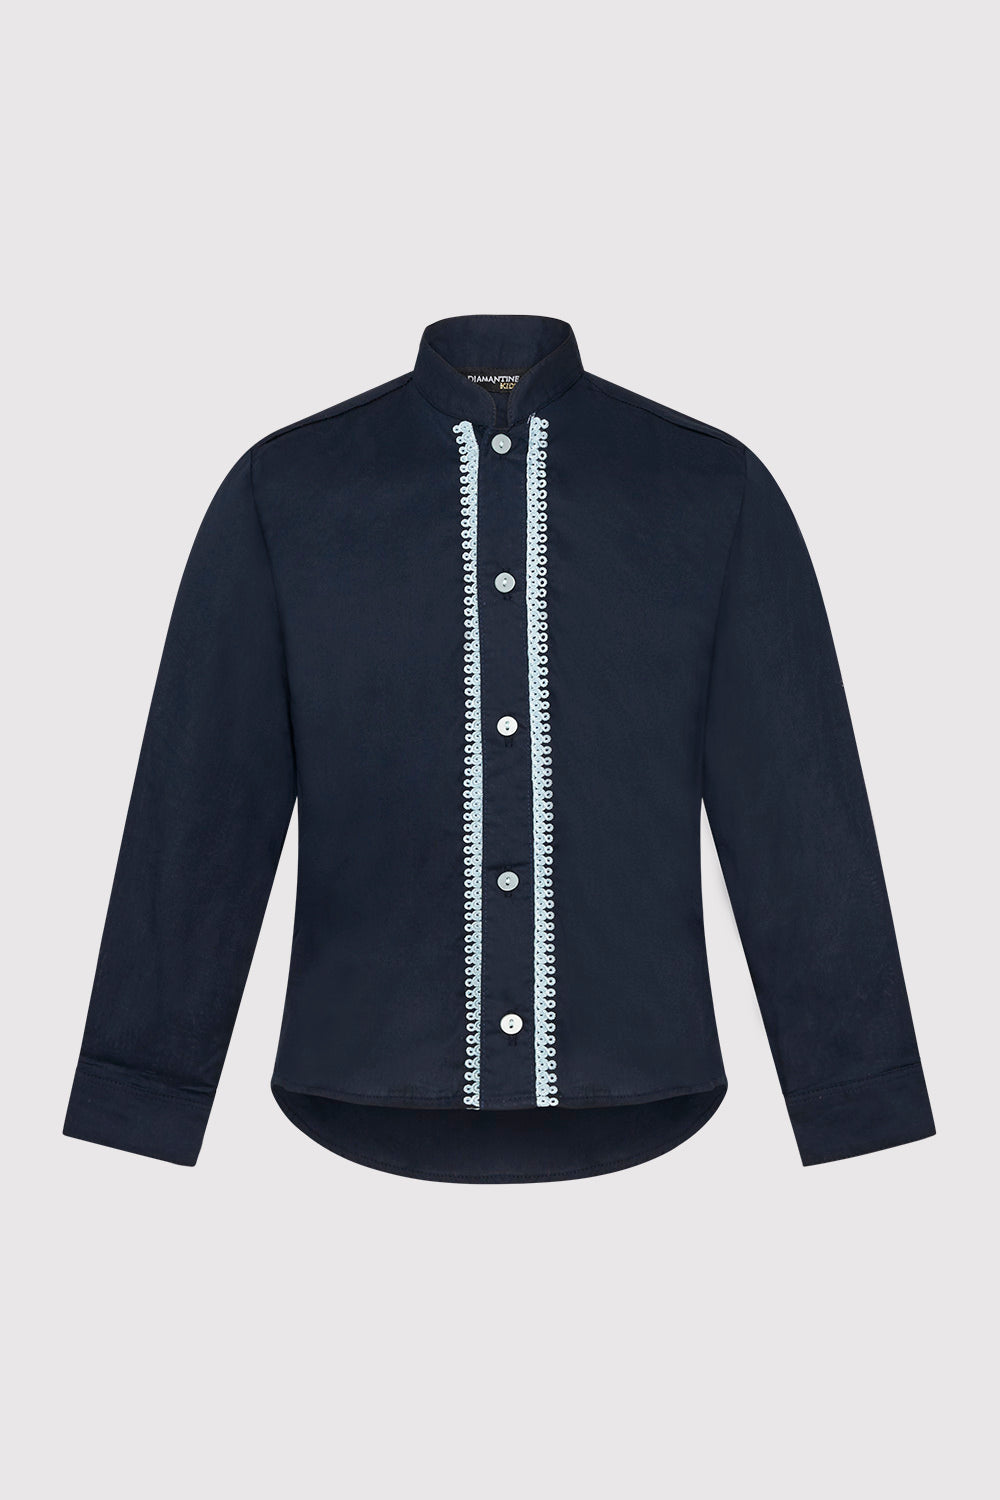 Long Sleeve Button-Up Boy's Shirt with Contrast Stitching in Navy Blue (2-12yrs)